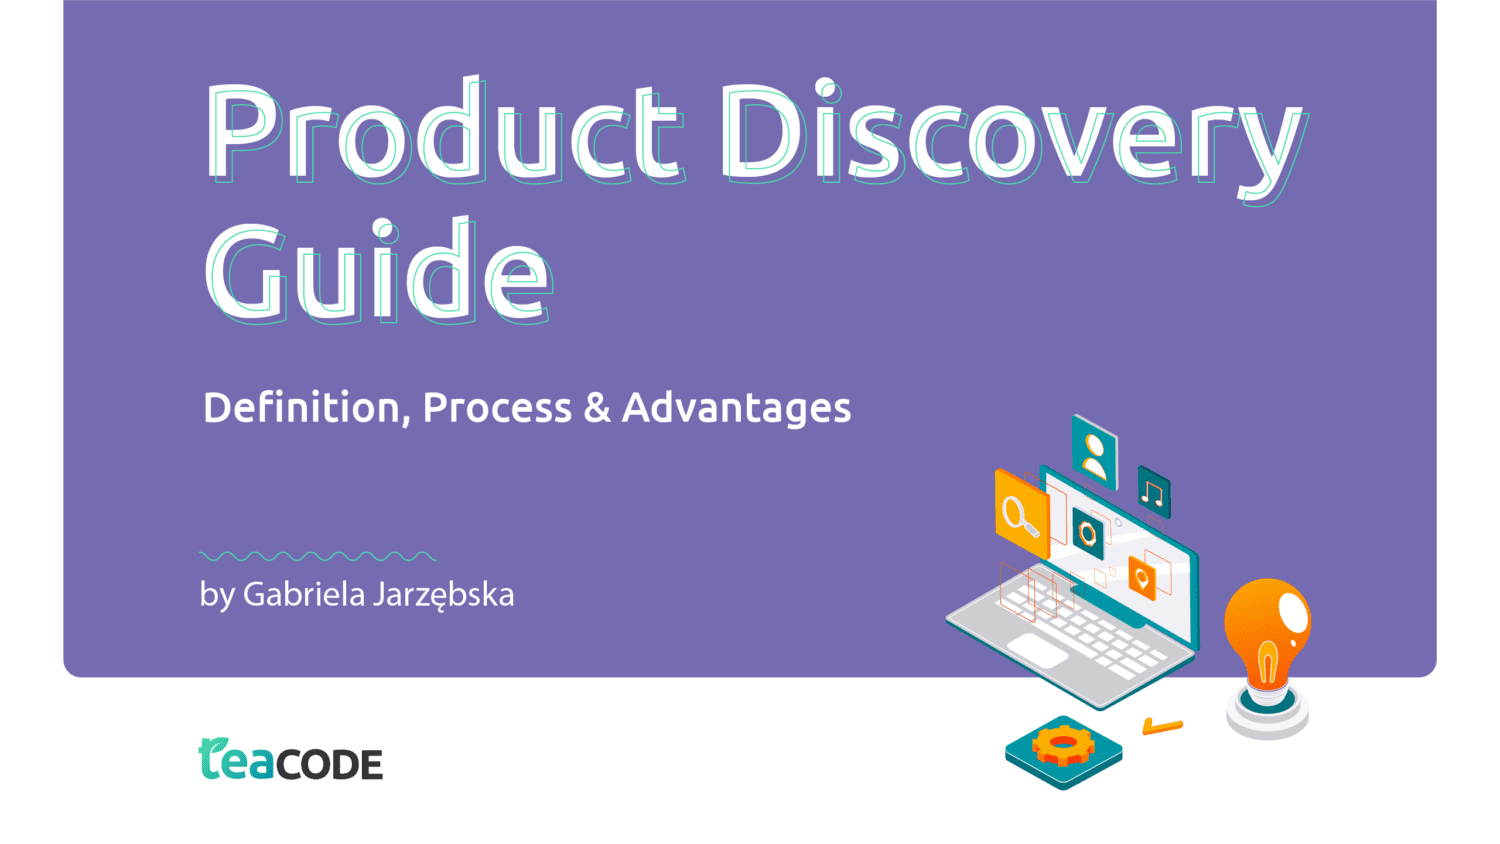 Product Discovery Guide – Definition, Process & Advantages